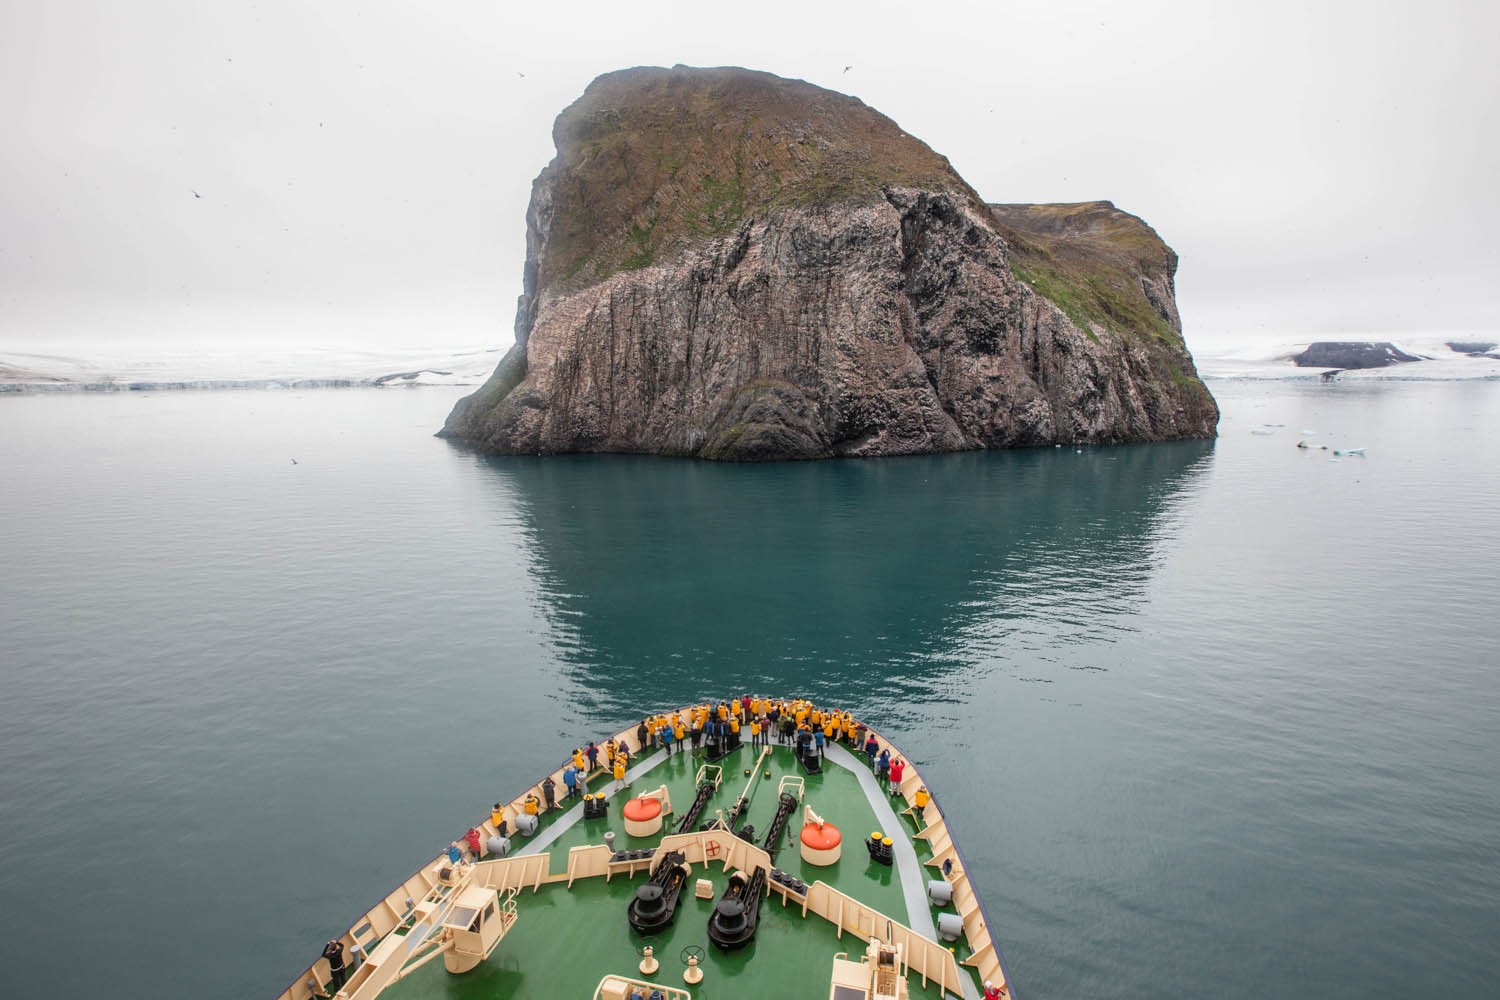 Guests traveling with Quark Expeditions guests on the deck of the ship on a voyage through the remote regions of the Russian Arctic, Franz Josef Land.